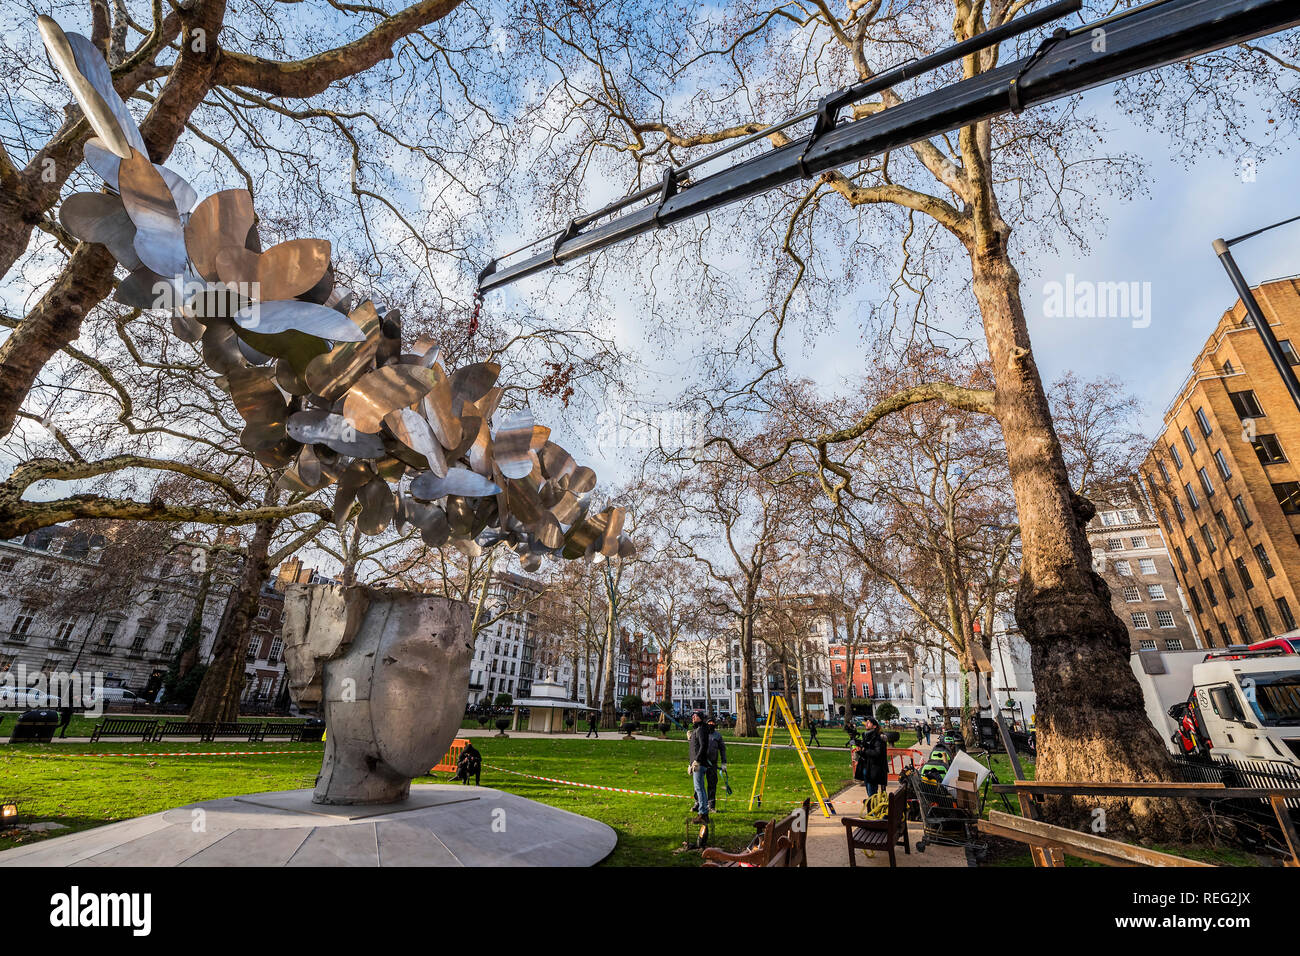 London, UK. 21st Januay 2019. The headdress is moved into position - Butterflies by Spanish artist Manolo Valdés launched by Opera Gallery. The sculpture was installed at Berkeley Square in London today, and is one of the eight sculptures included in City of London’s Sculpture in the City initiative that aims to turn the city into an urban gallery space. Weighing over five tonnes, the giant sculpture will be residing at its Mayfair location for six months. Credit: Guy Bell/Alamy Live News Stock Photo